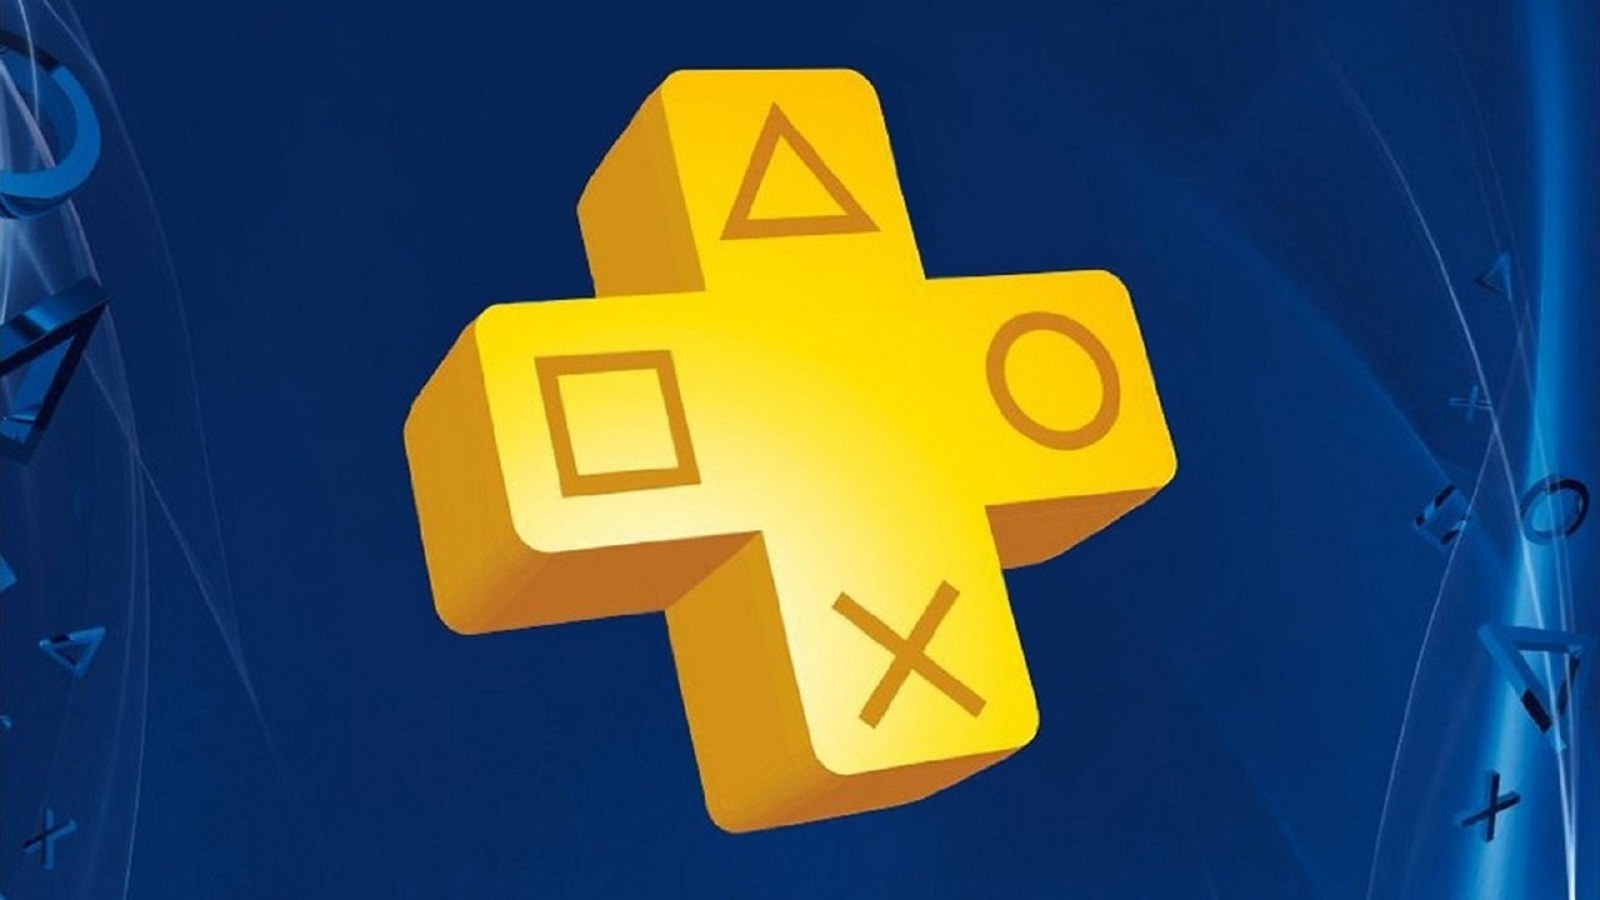 New PS Plus vs. old PS Plus: what's the difference between them